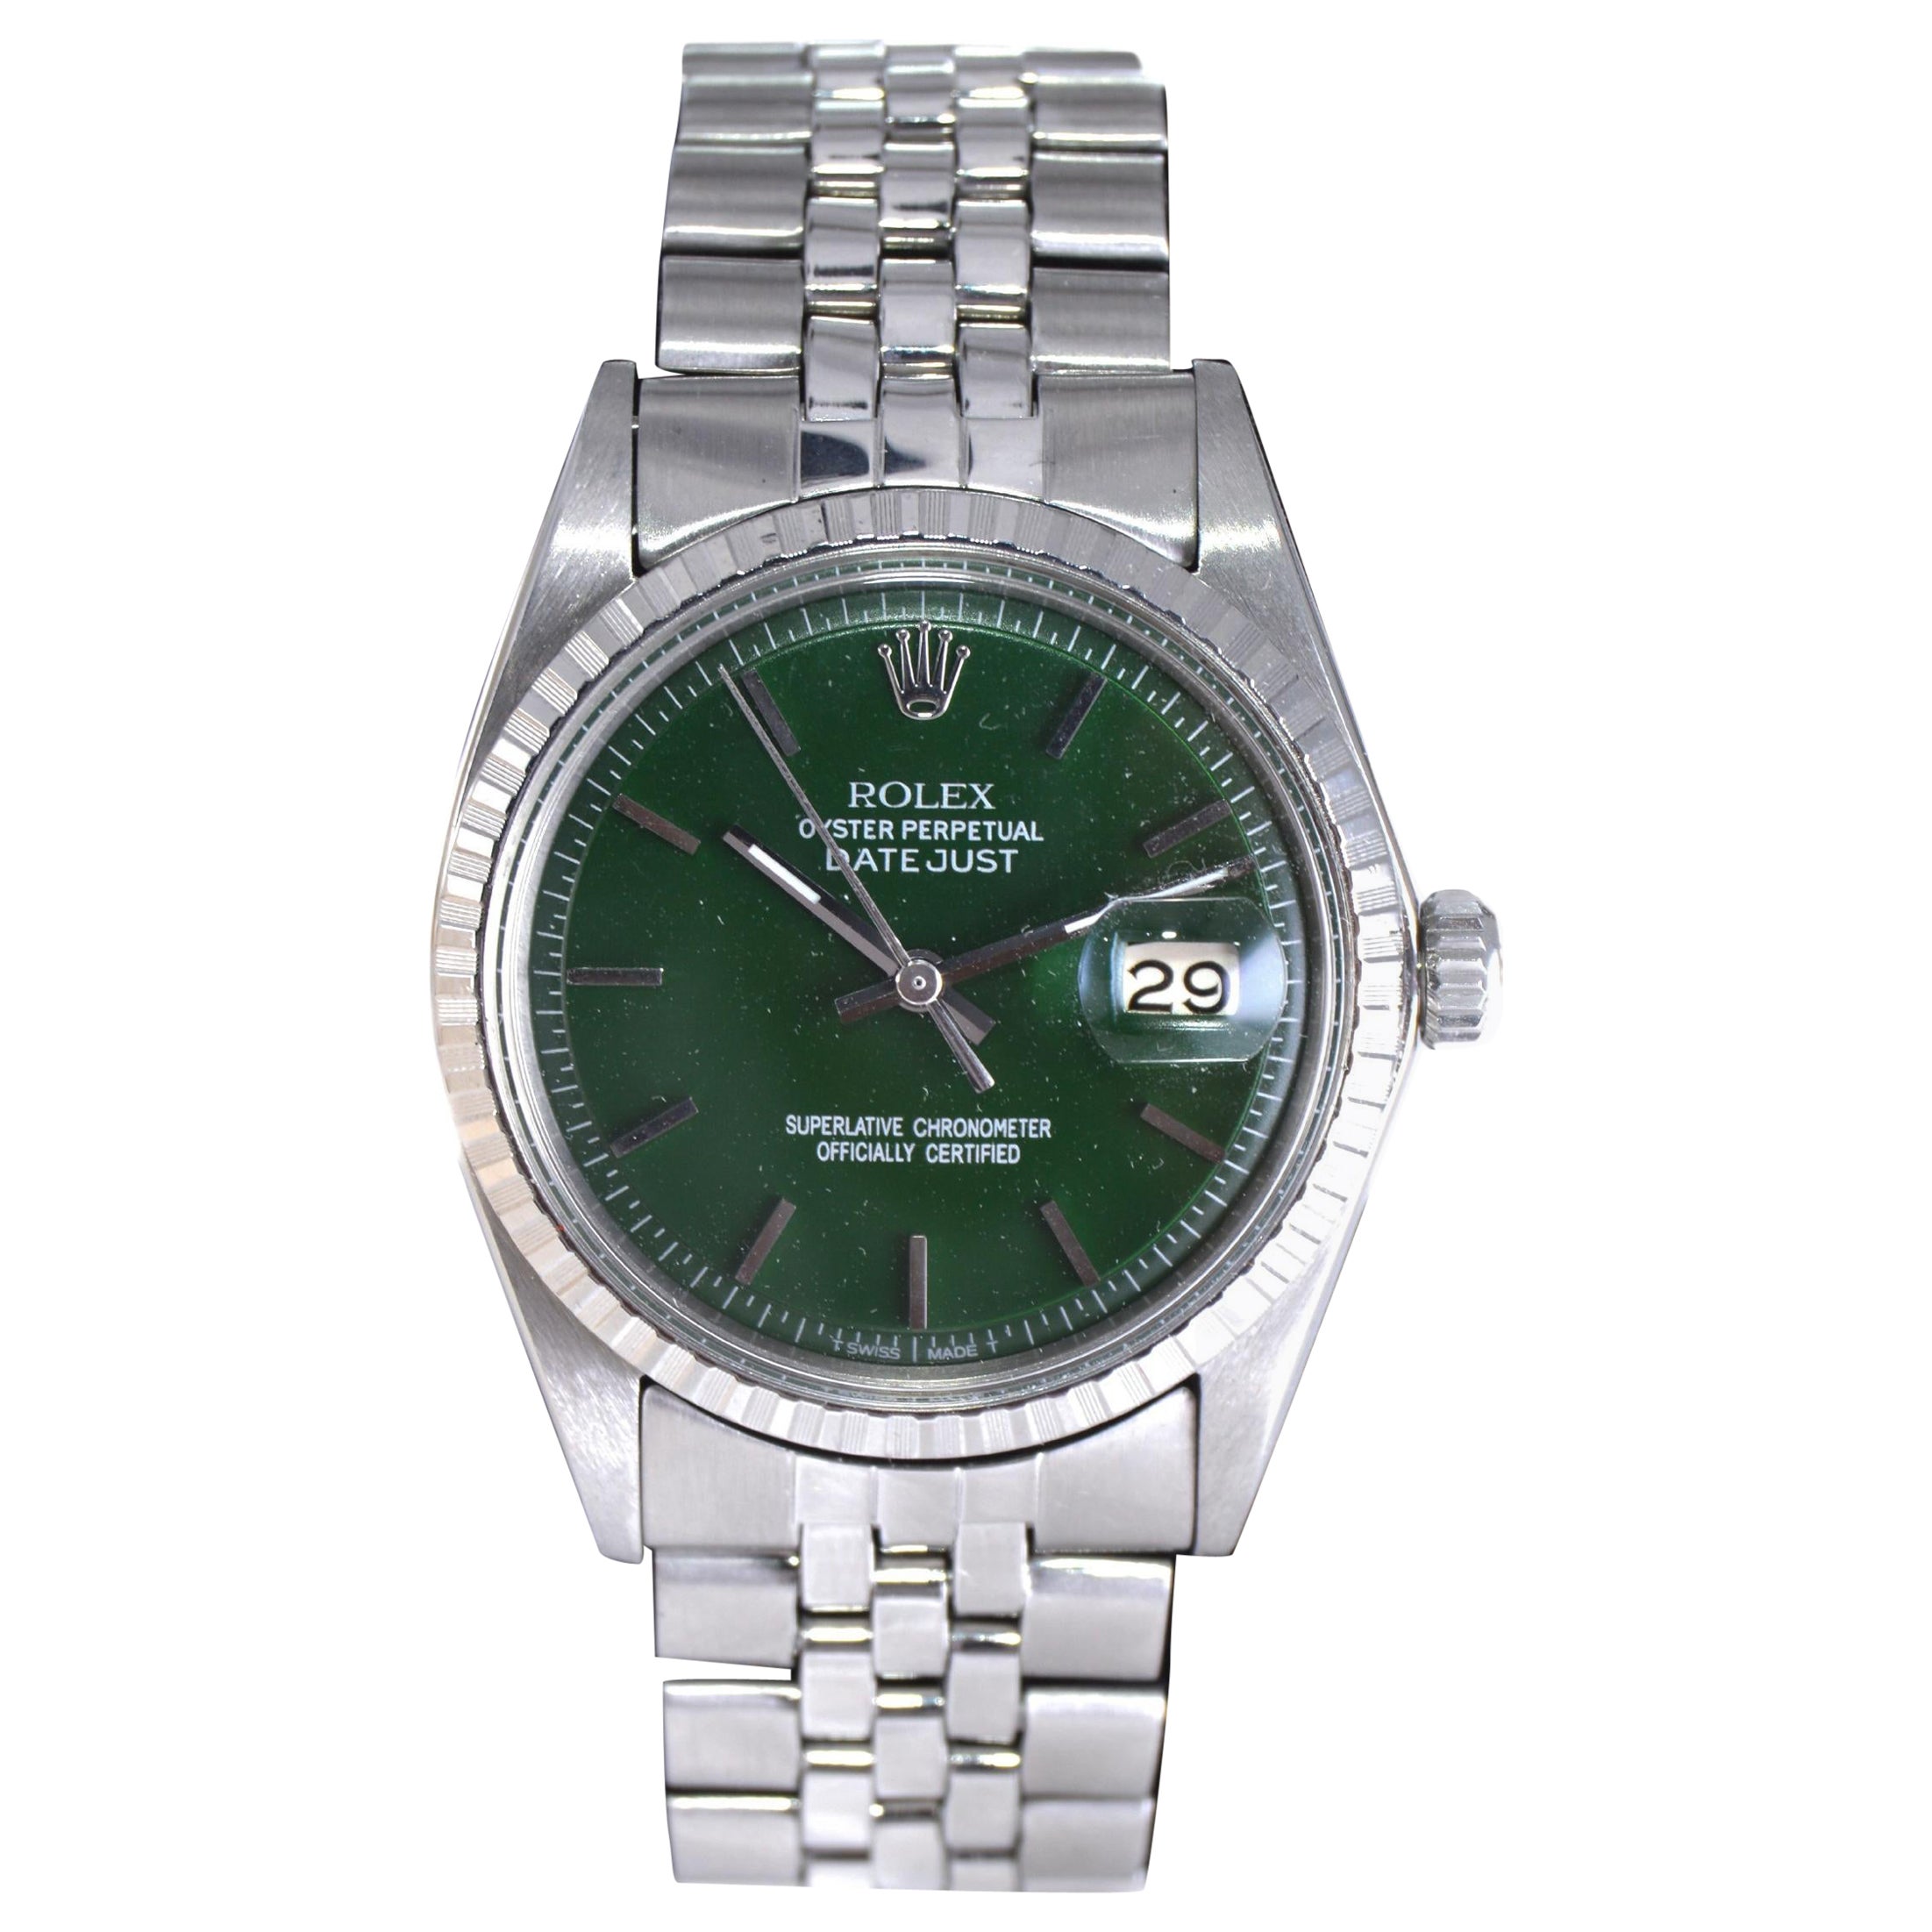 Rolex Stainless Steel Datejust with Custom Finished Green Dial, 1960s